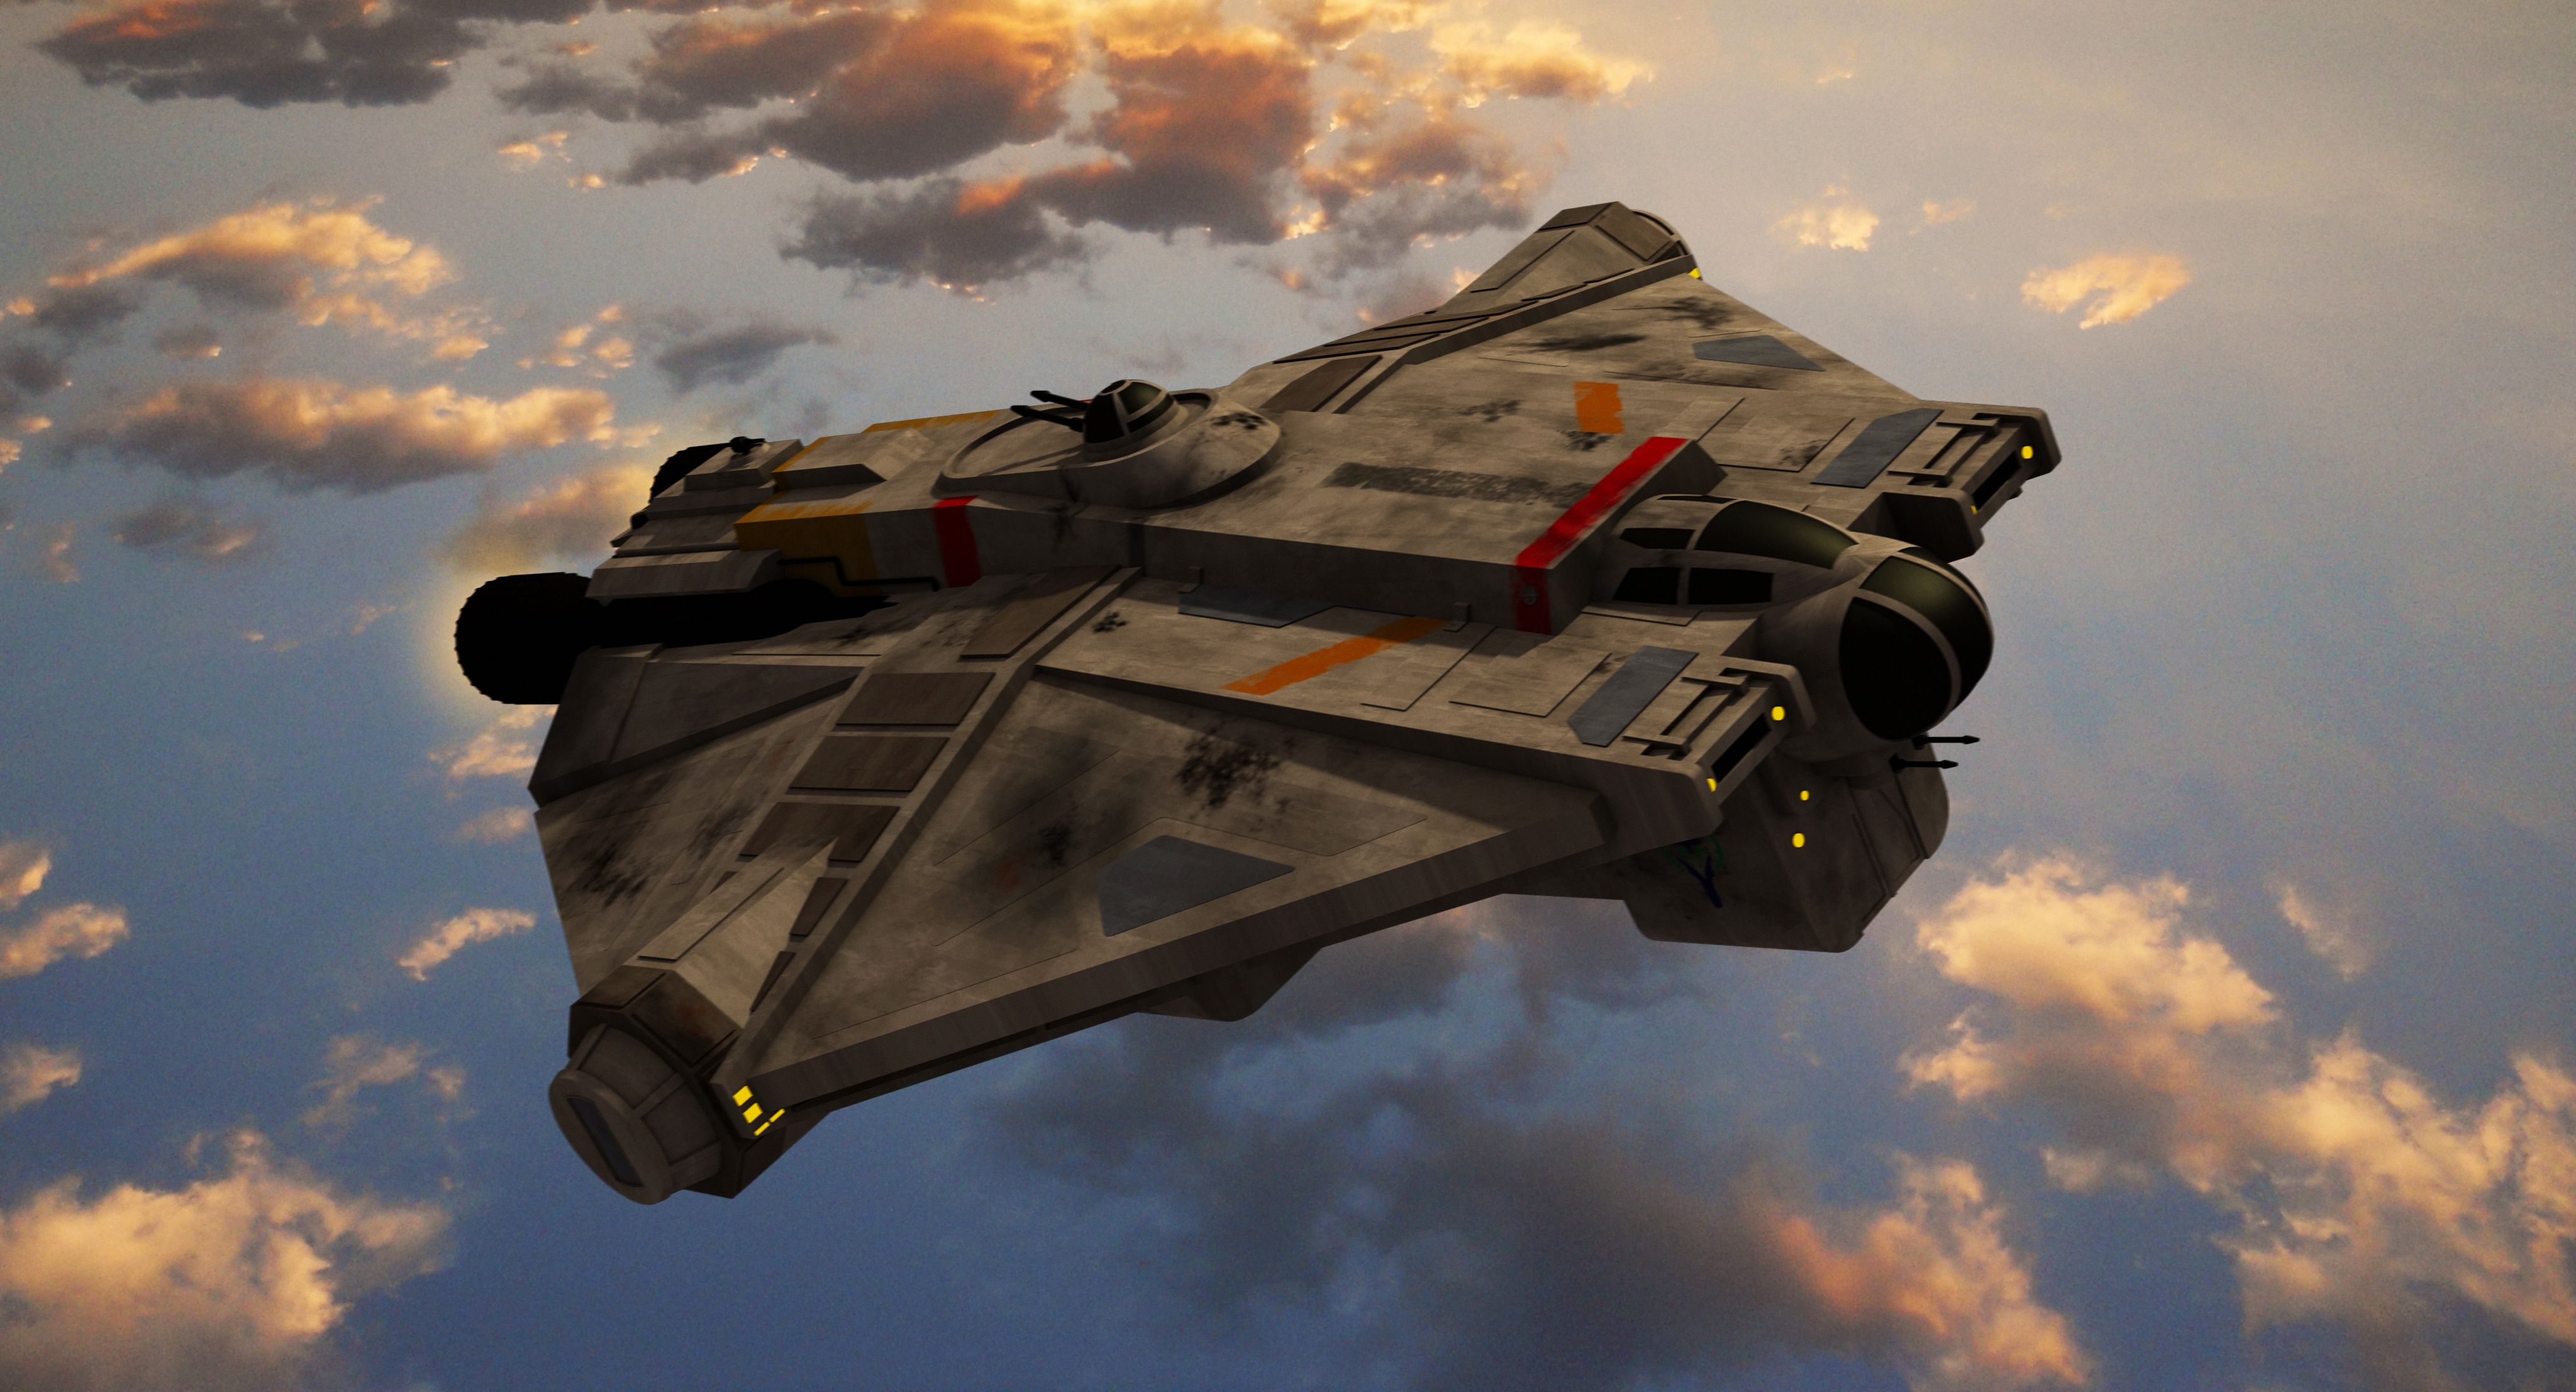 The Ghost Star Wars 4096x2214.